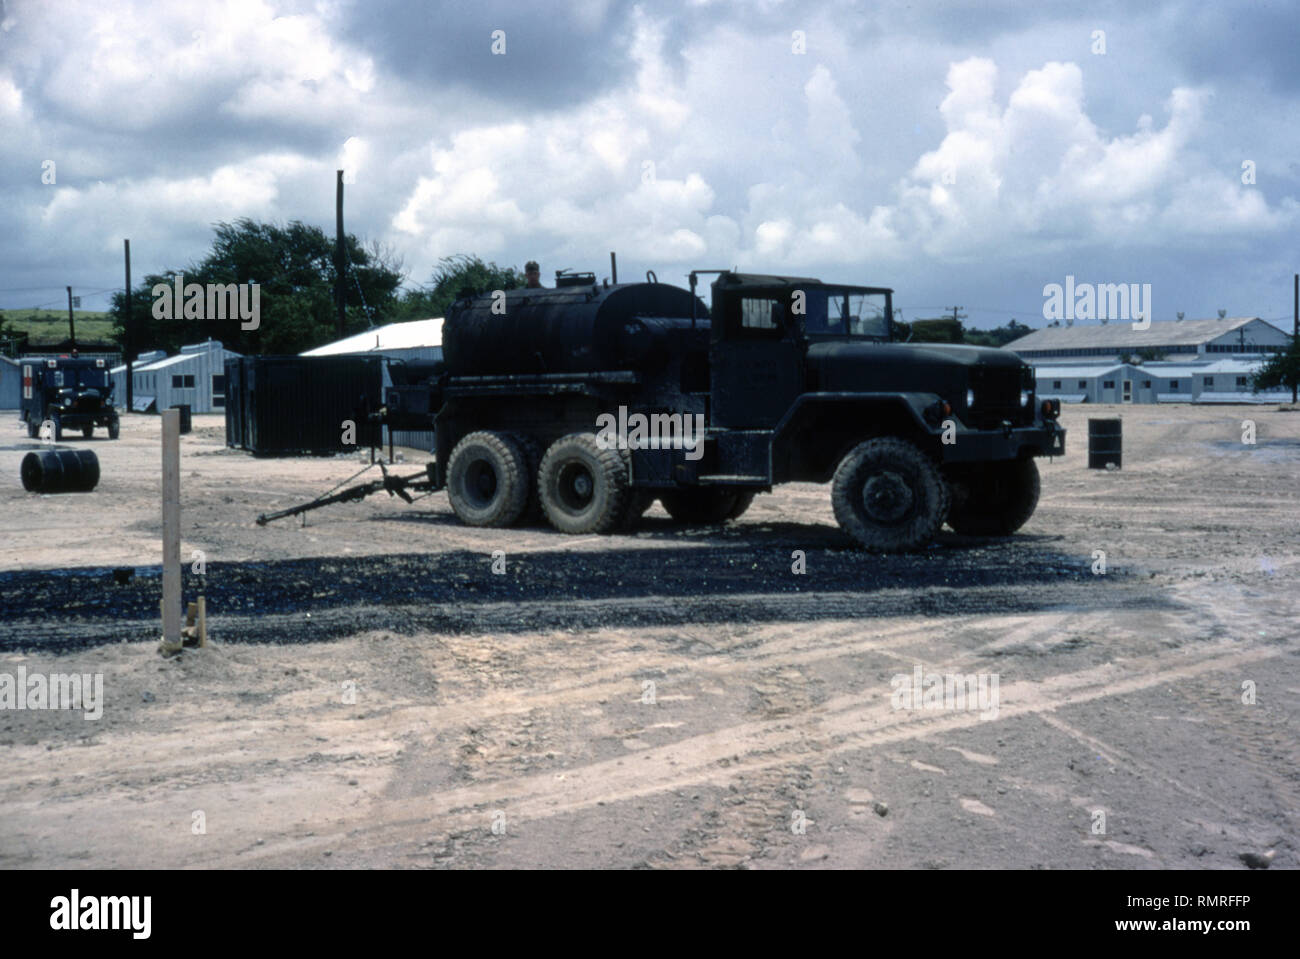 US ARMY / United States Army Tankwagen / Fuel Servicing Truck M54 Stock Photo